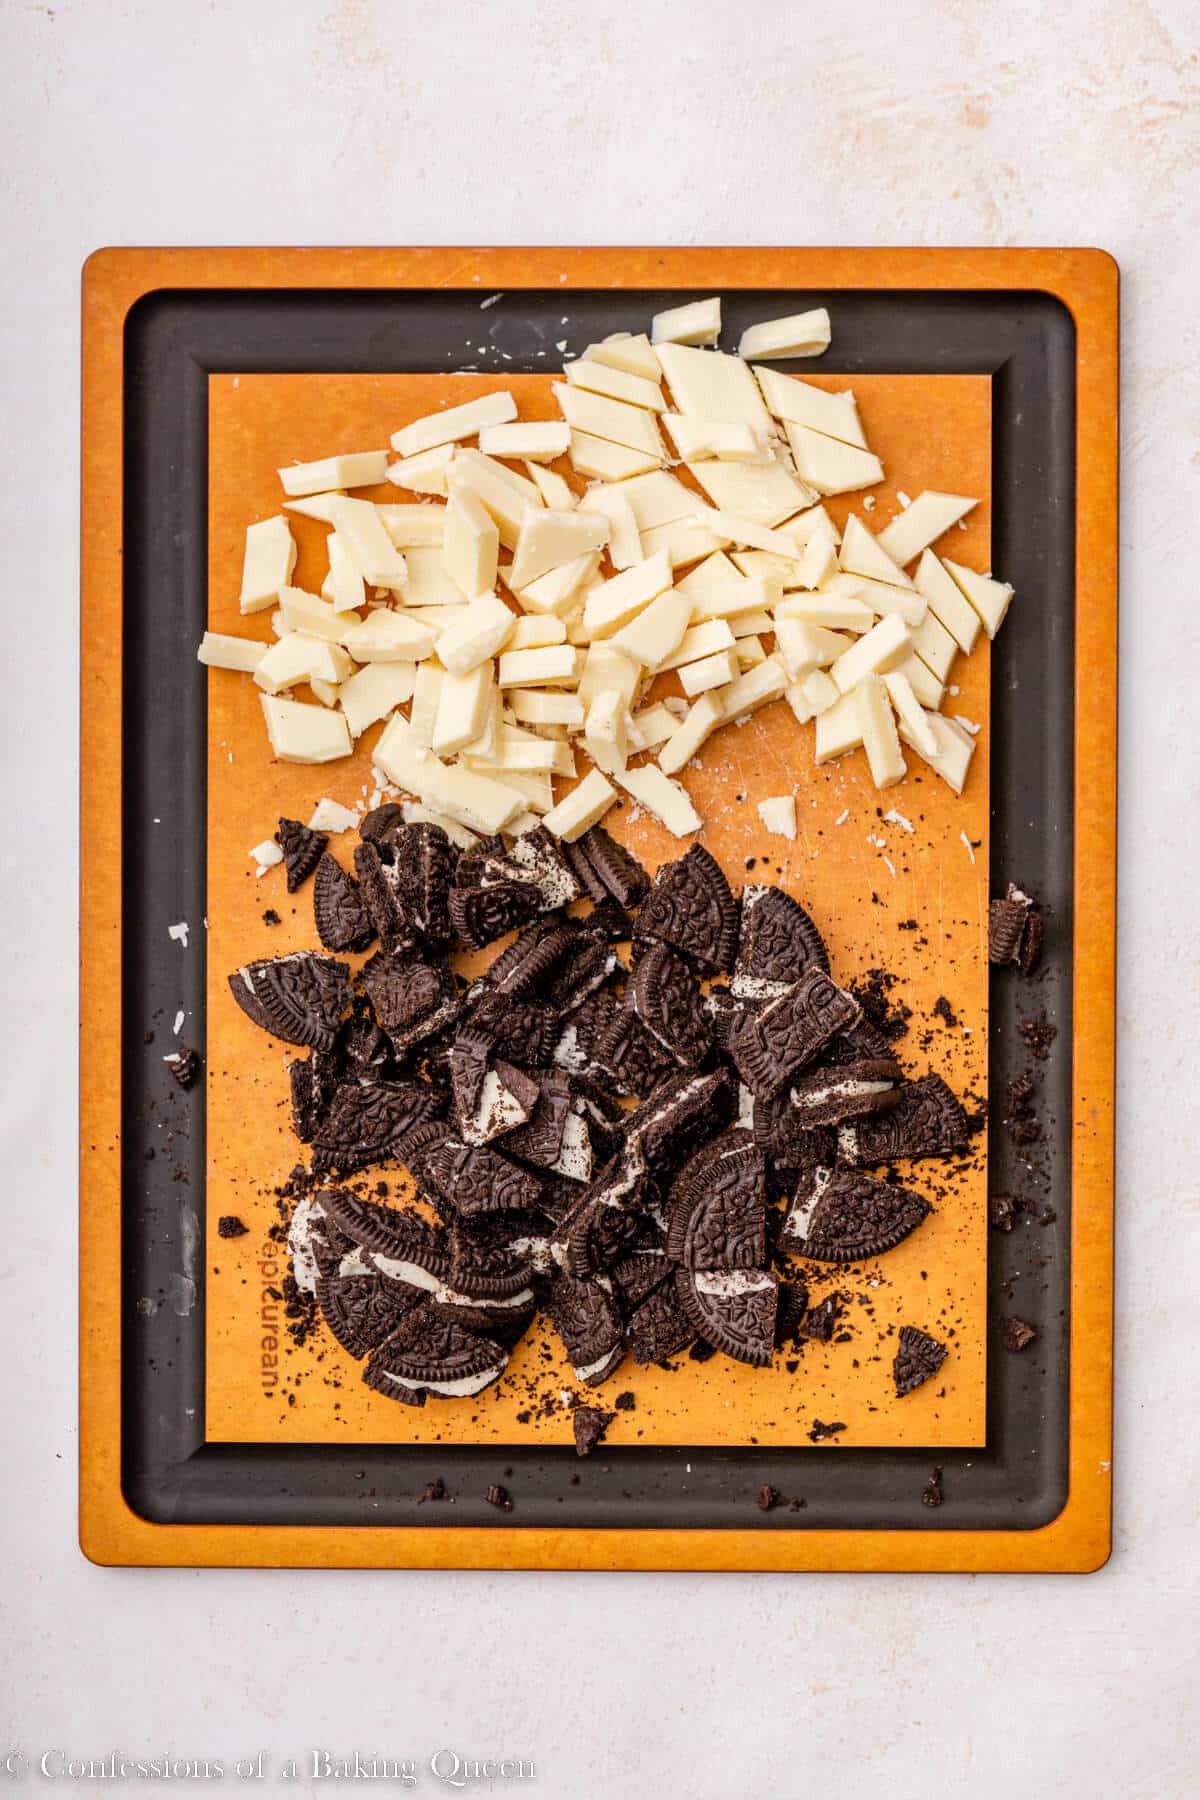 white chocolate and oreos cut into chunks on a small wood cutting board on a light surface